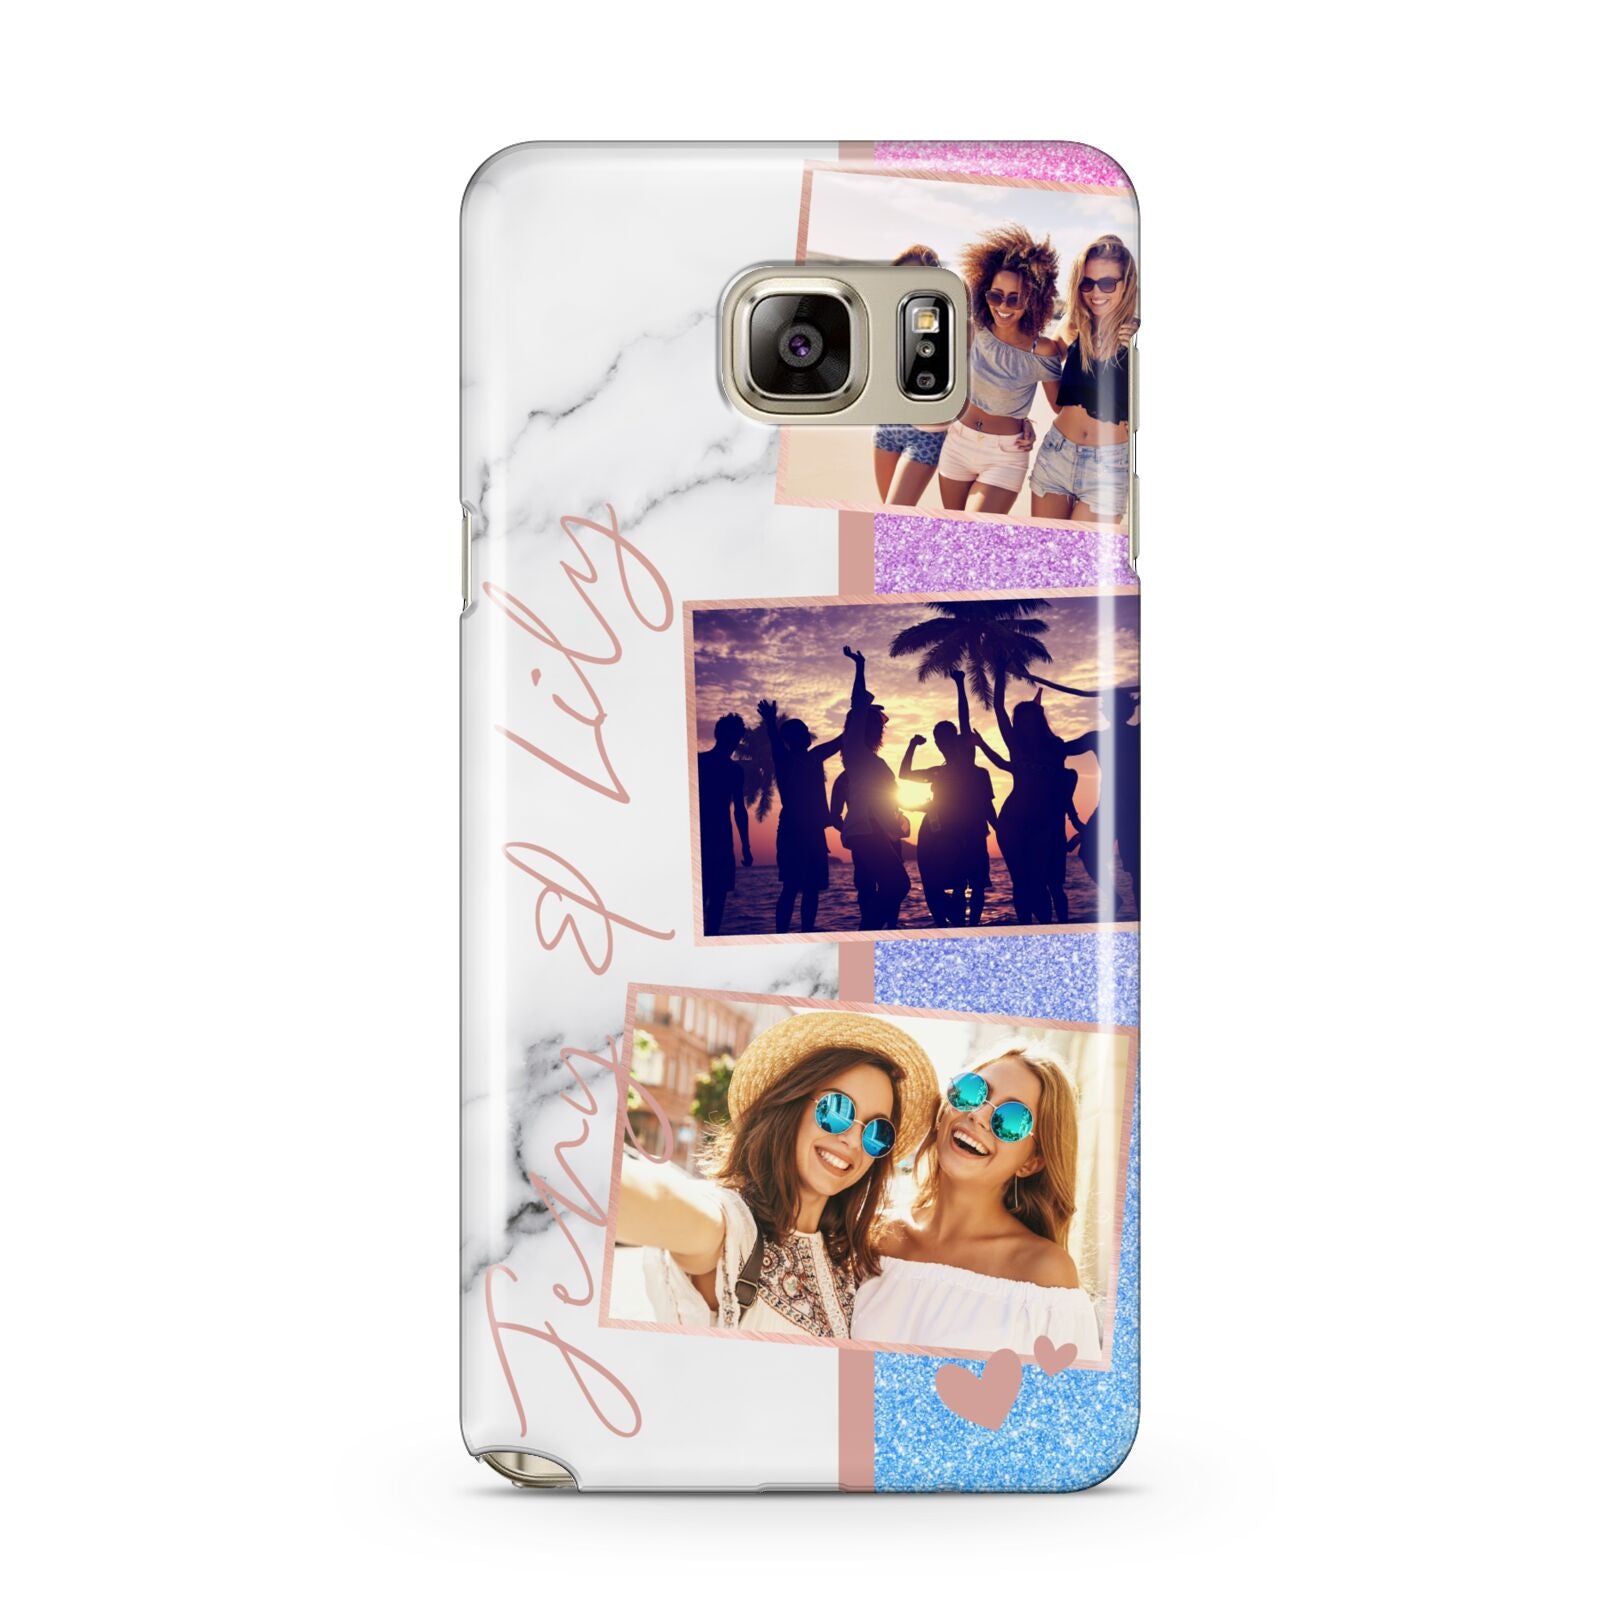 Glitter and Marble Photo Upload with Text Samsung Galaxy Note 5 Case